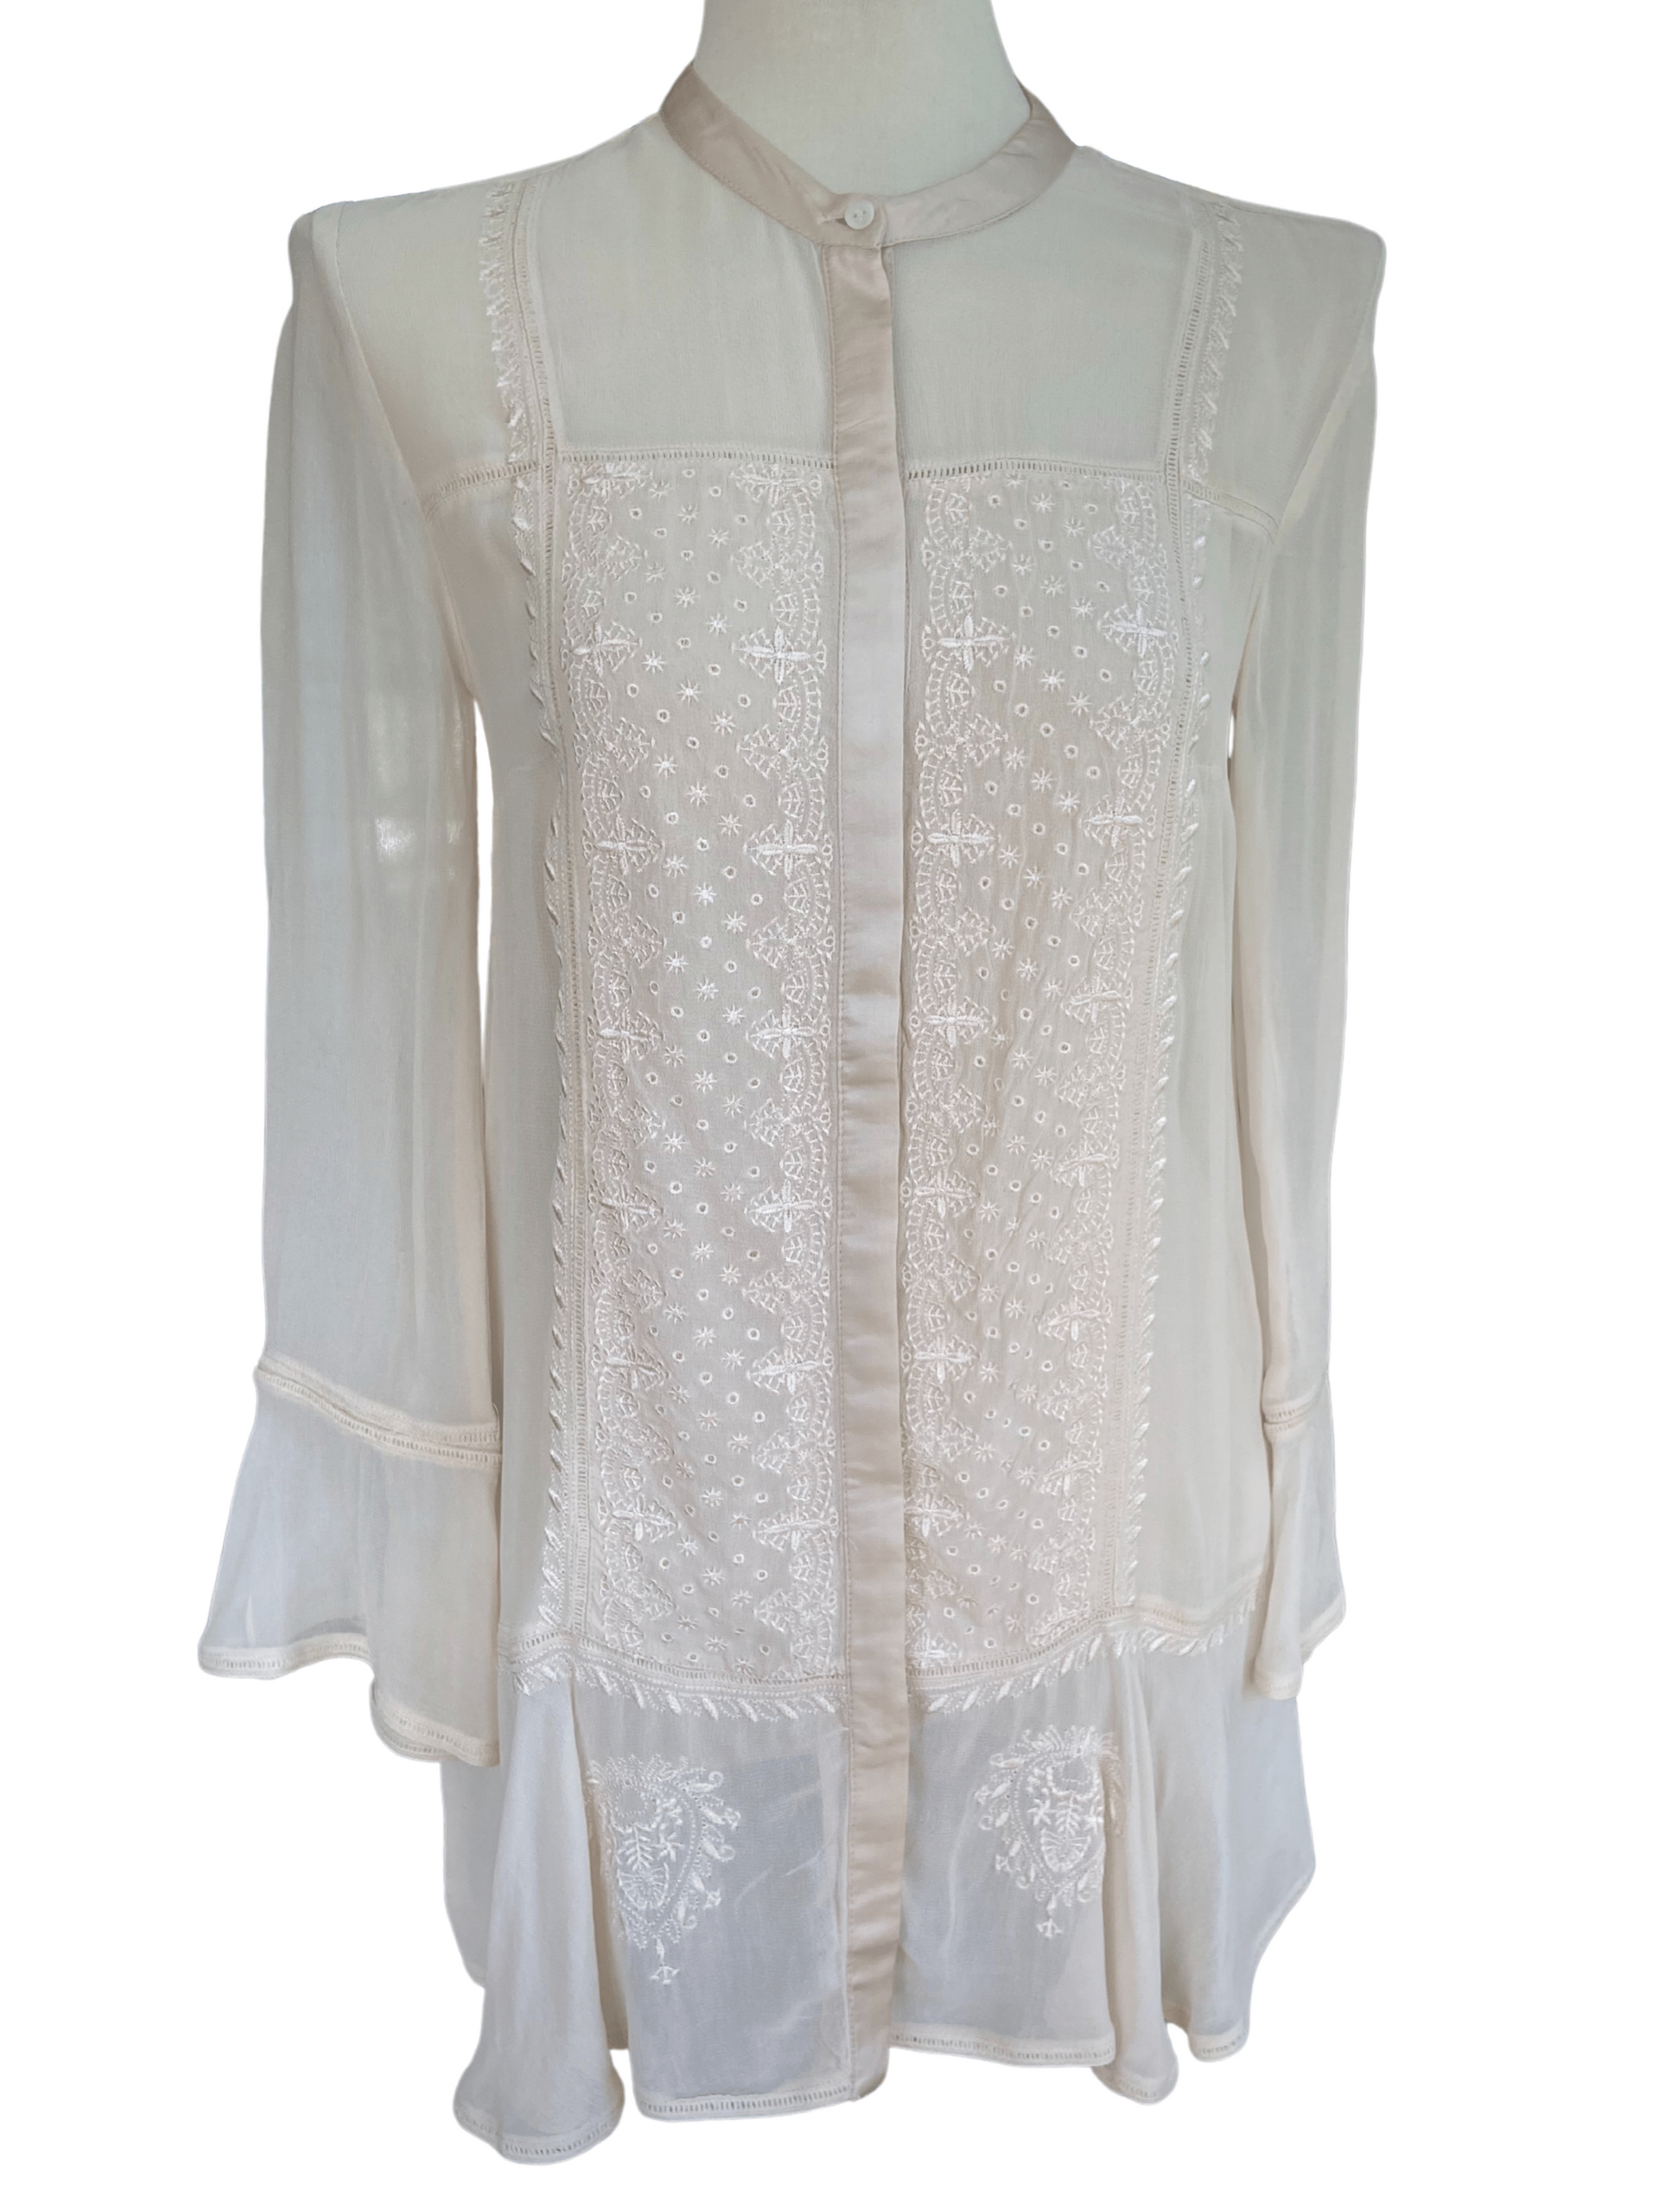 Soft Autumn FRENCH CONNECTION lace embroidered tunic